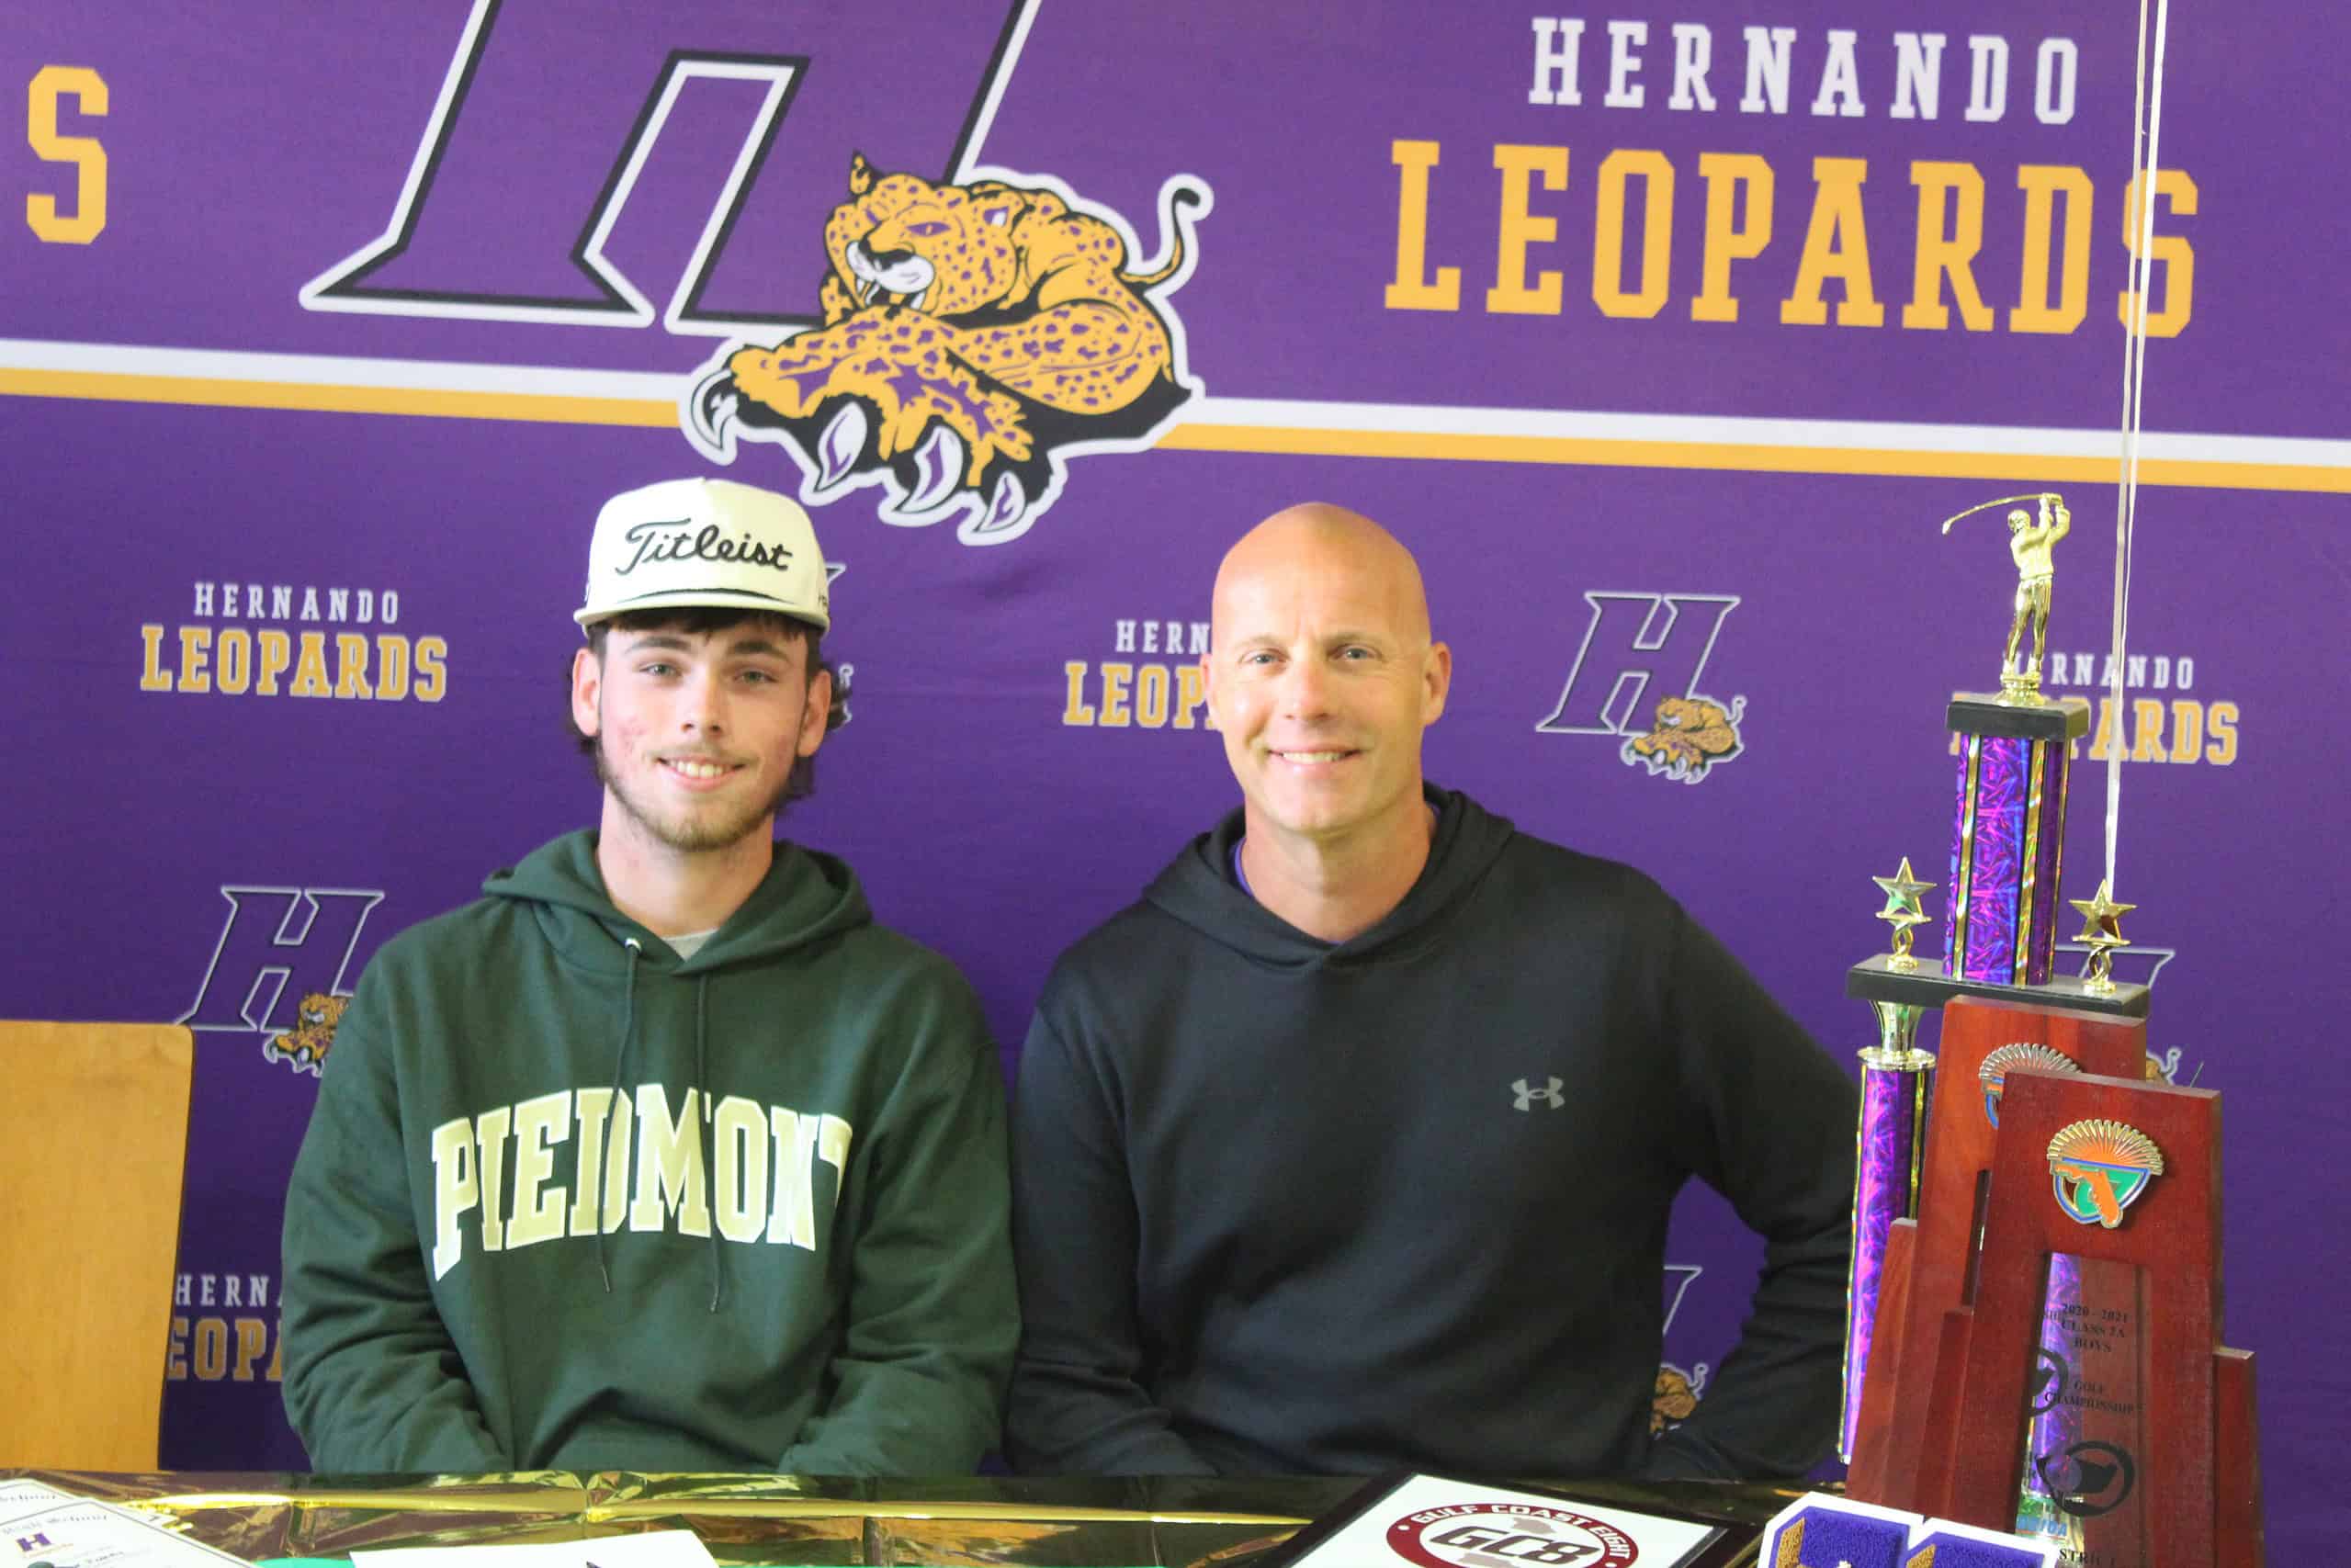 Connor Fahey (left) and Hernando Golf Coach Kevin Bittinger (right) pose for a picture during Connor’s signing ceremony on Tuesday, March 19. [Credit: A. Szempruch]